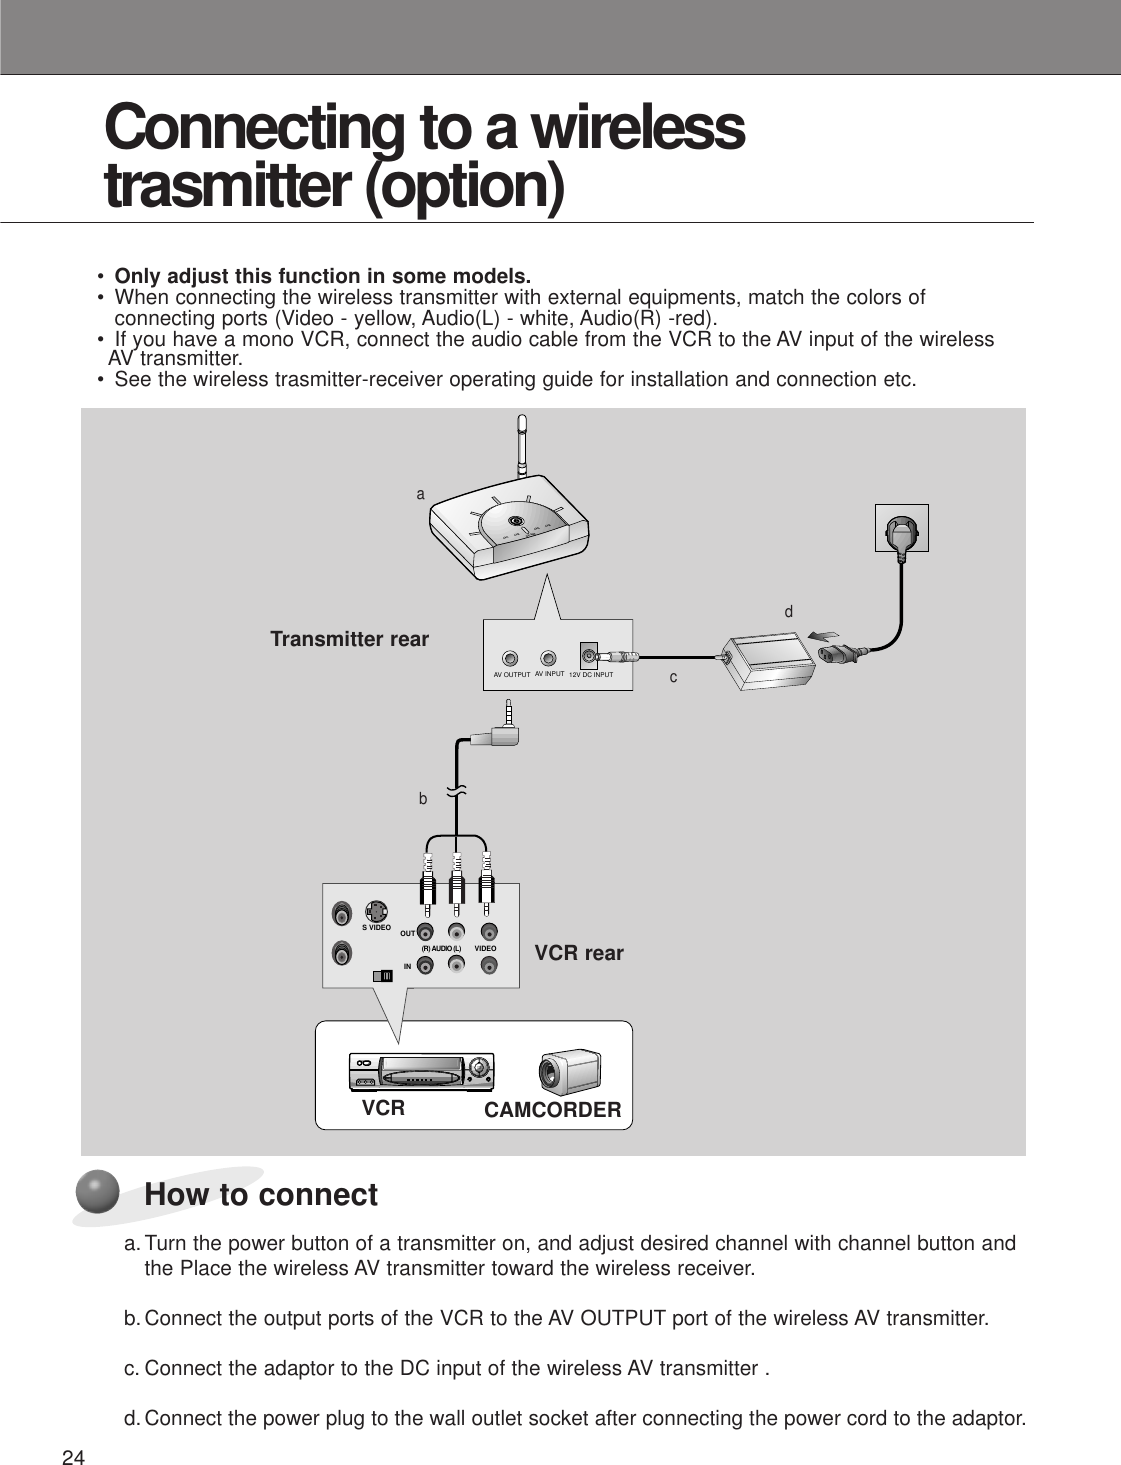 24Connecting to a wireless trasmitter (option)How to connectS VIDEO(R) AUDIO (L)       VIDEOOUTINAV INPUTAV OUTPUT 12V DC INPUTCH1 CH2 CH3CH S/WCH4CH1 CH2 CH3CH S/WCH4AV INPUTa.Turn the power button of a transmitter on, and adjust desired channel with channel button and the Place the wireless AV transmitter toward the wireless receiver.b.Connect the output ports of the VCR to the AV OUTPUT port of the wireless AV transmitter.c. Connect the adaptor to the DC input of the wireless AV transmitter .d.Connect the power plug to the wall outlet socket after connecting the power cord to the adaptor.•Only adjust this function in some models.• When connecting the wireless transmitter with external equipments, match the colors of connecting ports (Video - yellow, Audio(L) - white, Audio(R) -red).• If you have a mono VCR, connect the audio cable from the VCR to the AV input of the wireless AV transmitter.• See the wireless trasmitter-receiver operating guide for installation and connection etc.Transmitter rearVCR rearVCR CAMCORDERabcd